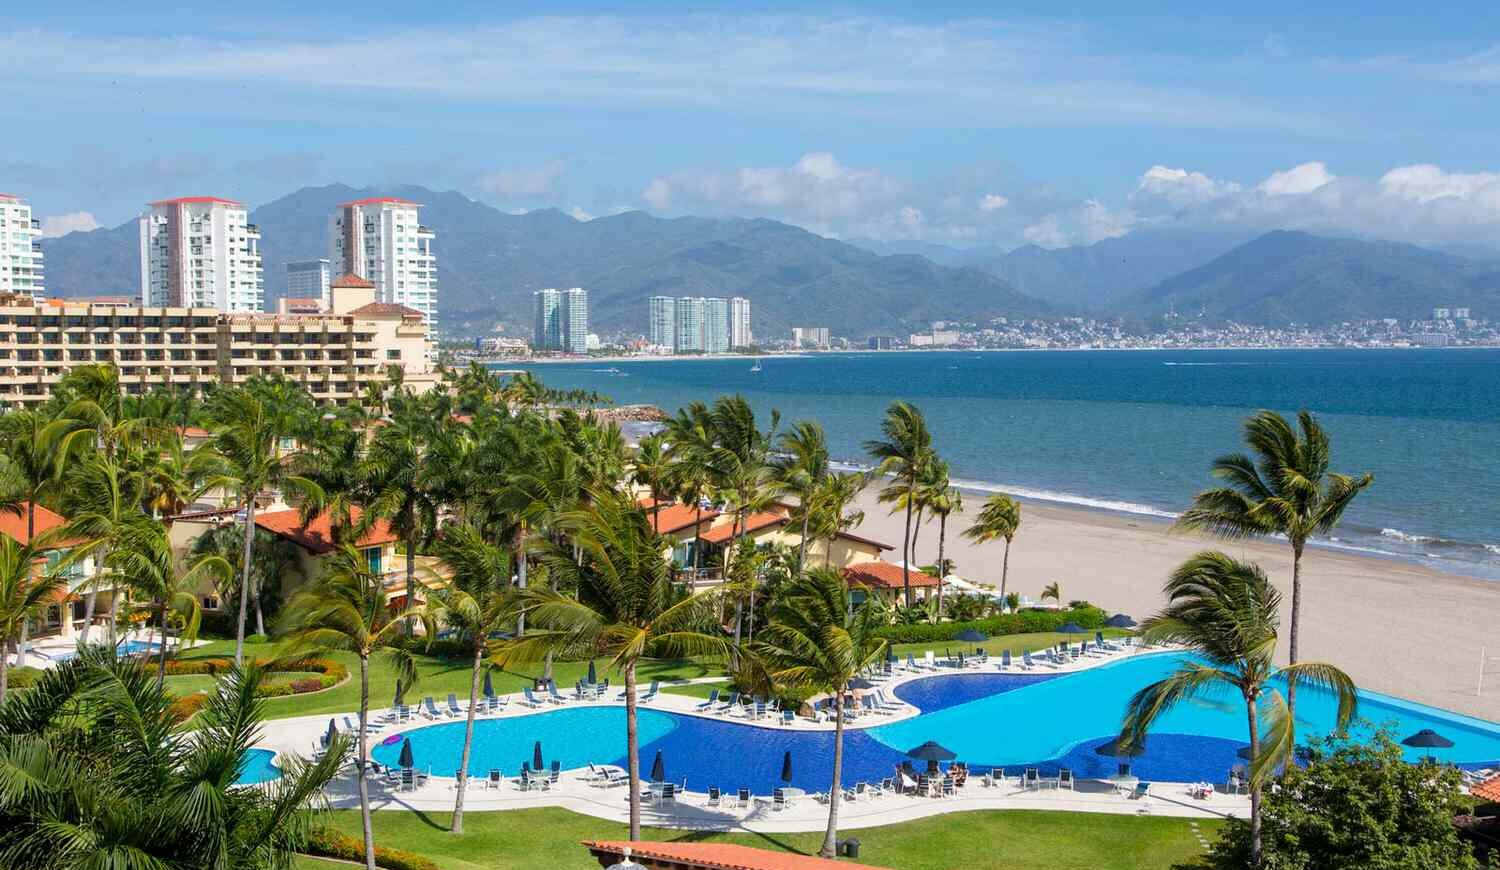 Direct flights from Edmonton to Puerto Vallarta for 290 CAD round-trip including GST!